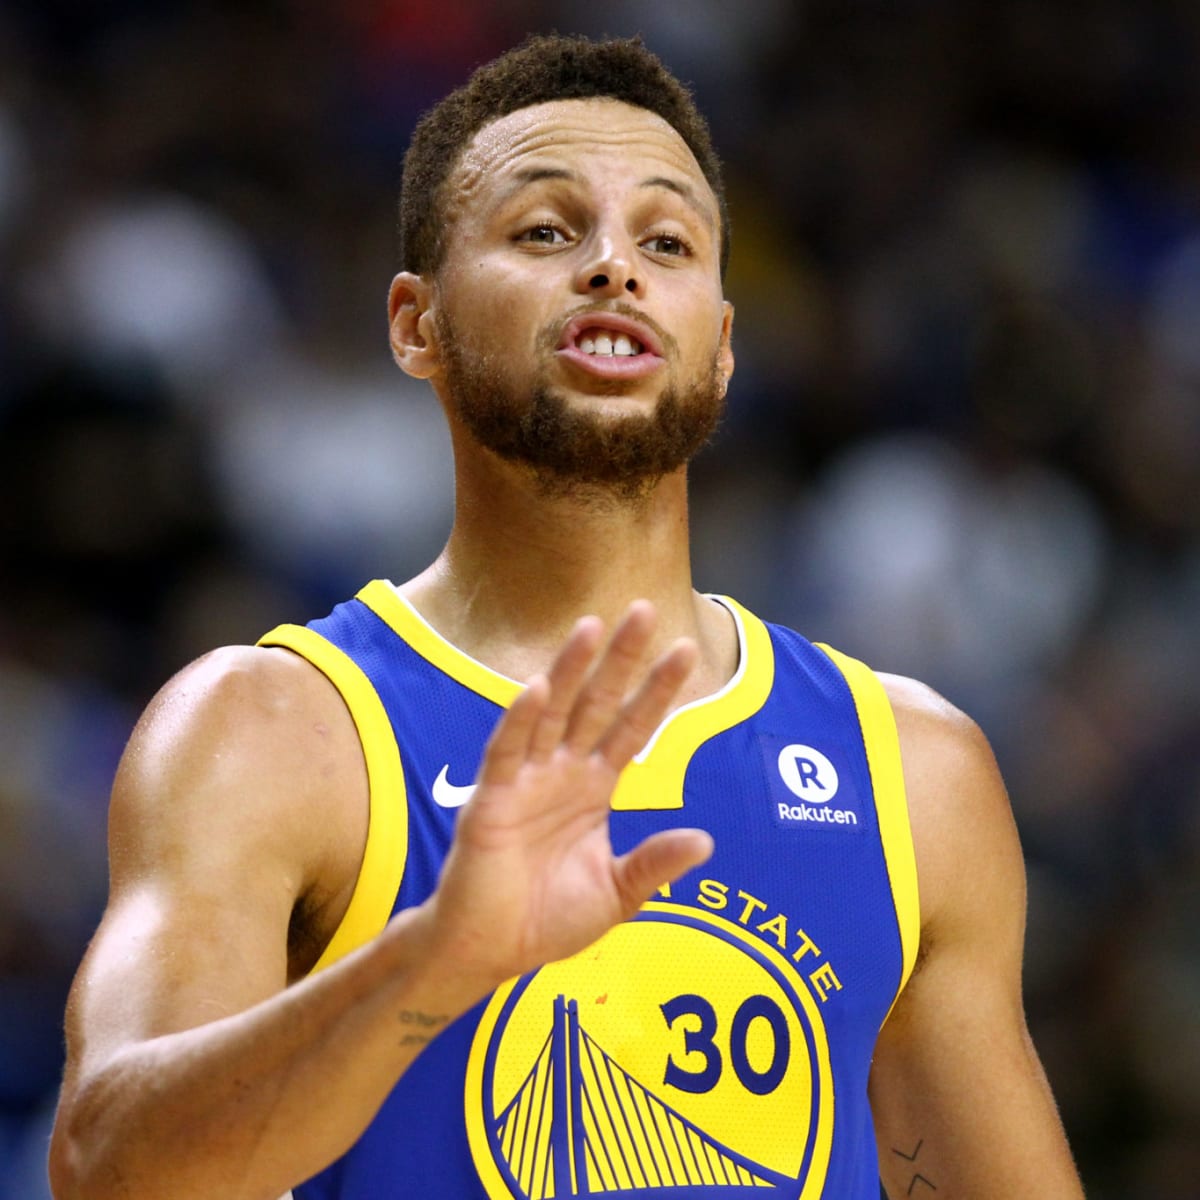 Warriors fans dress goat in Steph Curry jersey at parade